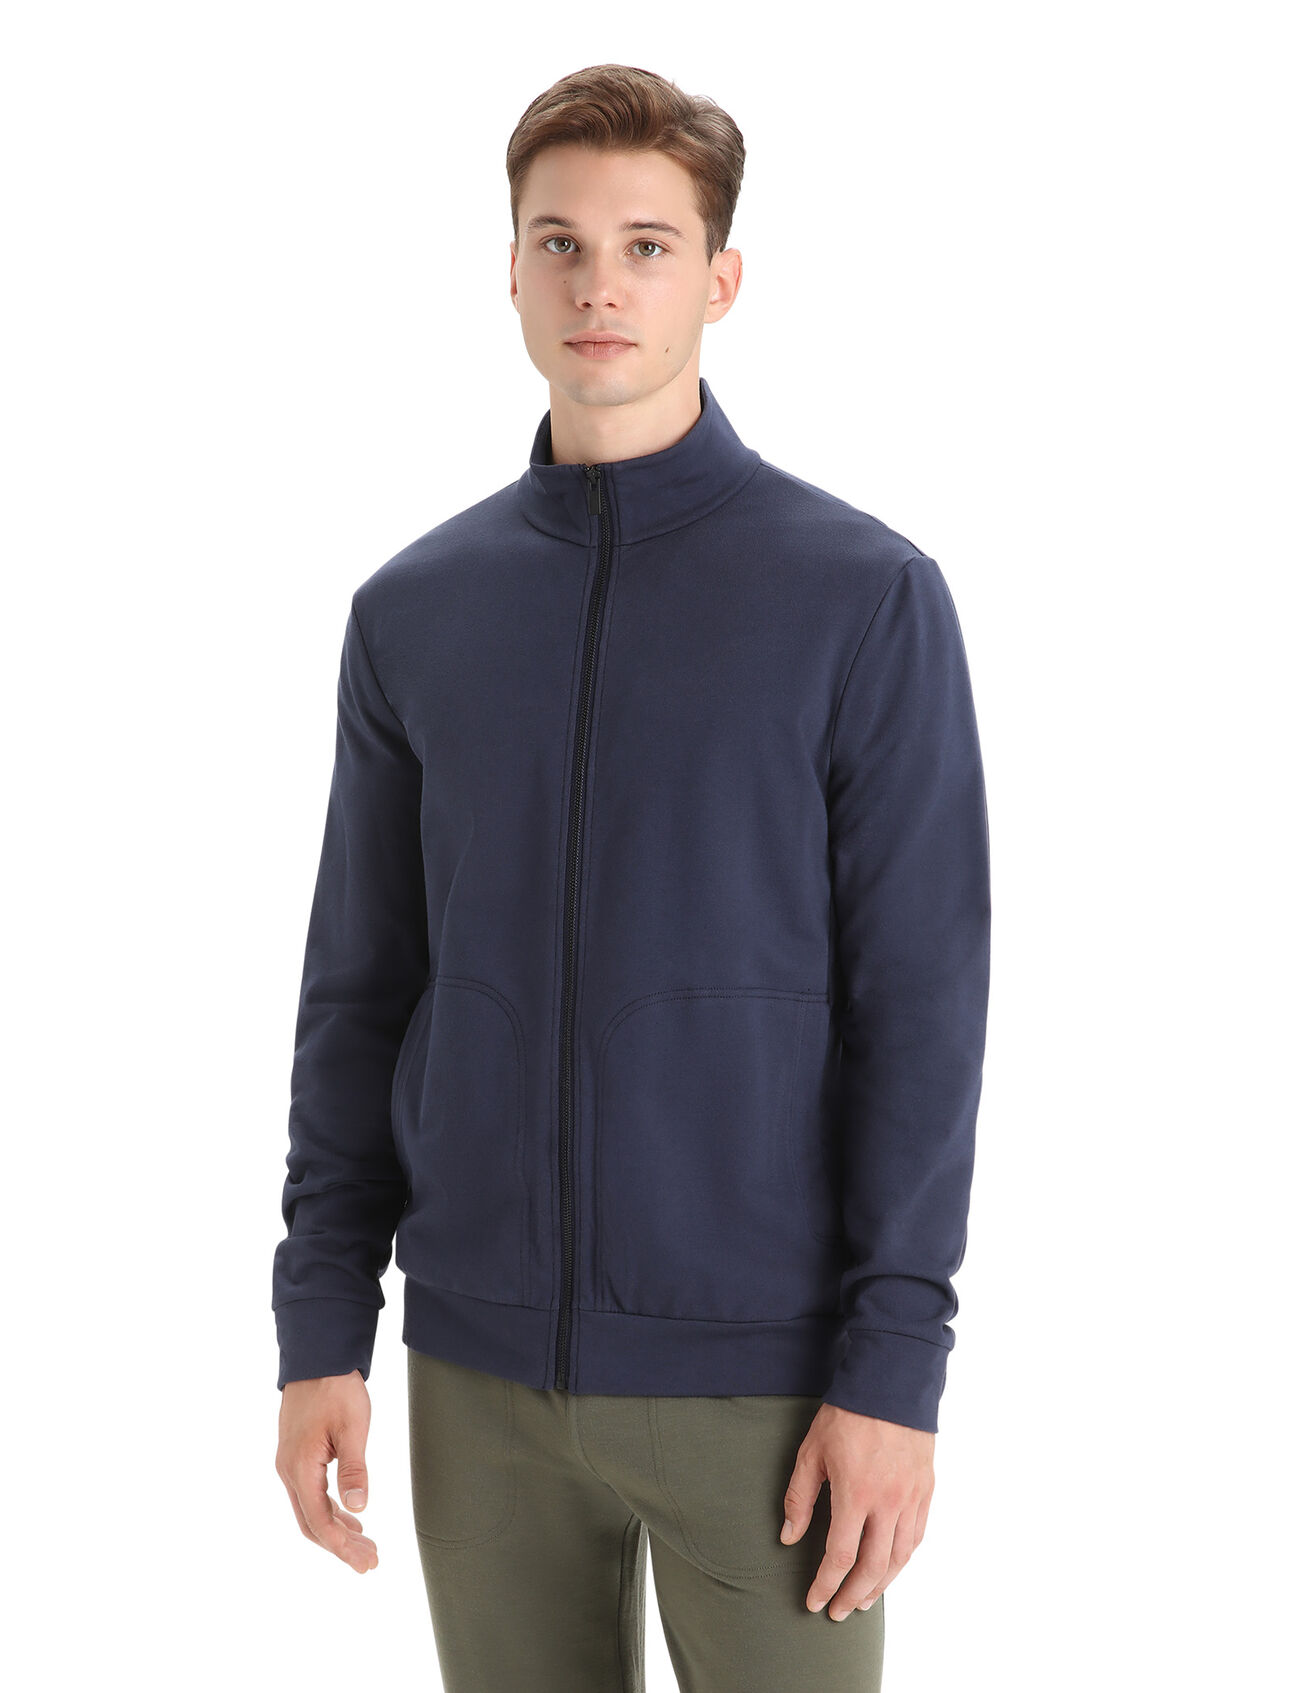 Mens Merino Blend Central Long Sleeve Zip Sweatshirt A clean, classic and comfortable everyday sweatshirt that blends natural merino wool with organically grown cotton, the Central Classic Long Sleeve Zip is durable, breathable and incredibly versatile.